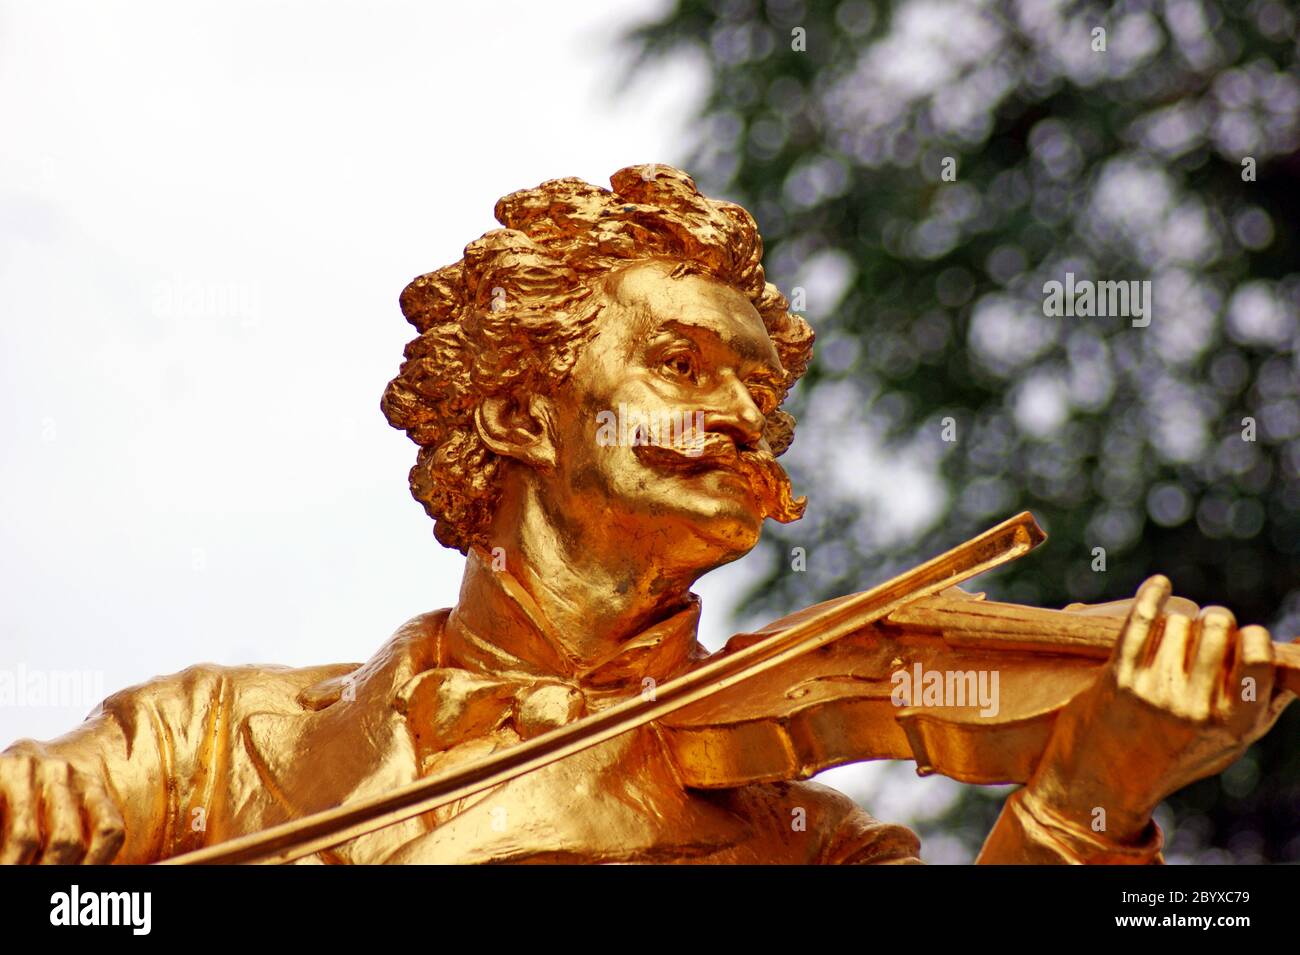 Gold-gilded bronze statue of Johann Strauss playing a violin in the Stadtpark in Vienna, Austria. Stock Photo